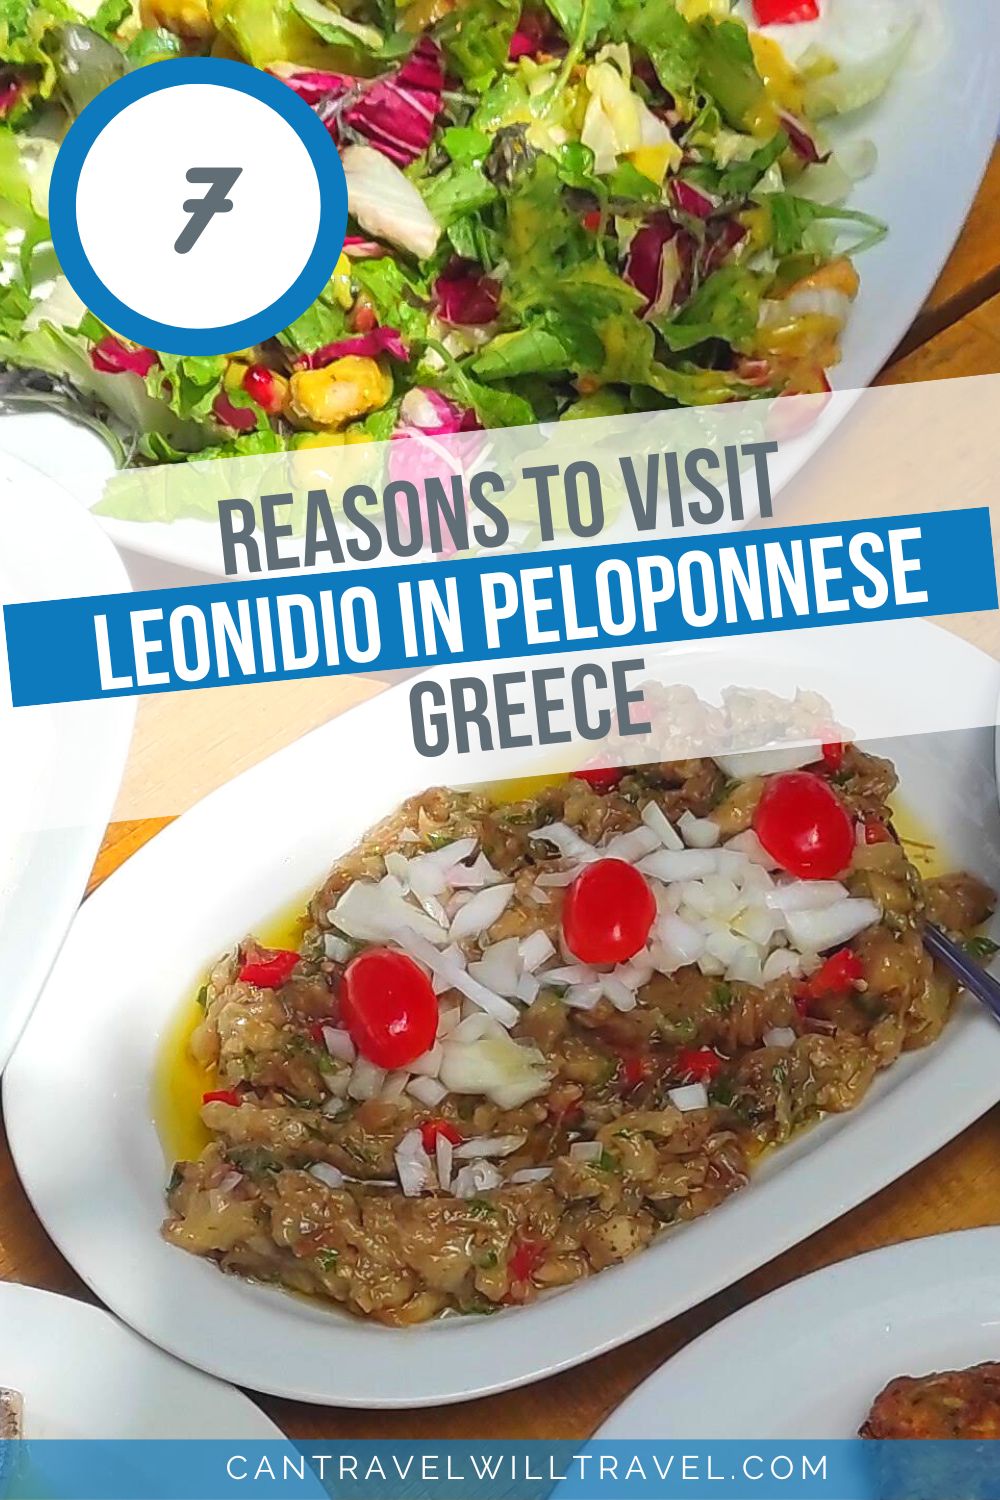 7 Reasons Why You Should Visit Leonidio in Peloponnese, Greece